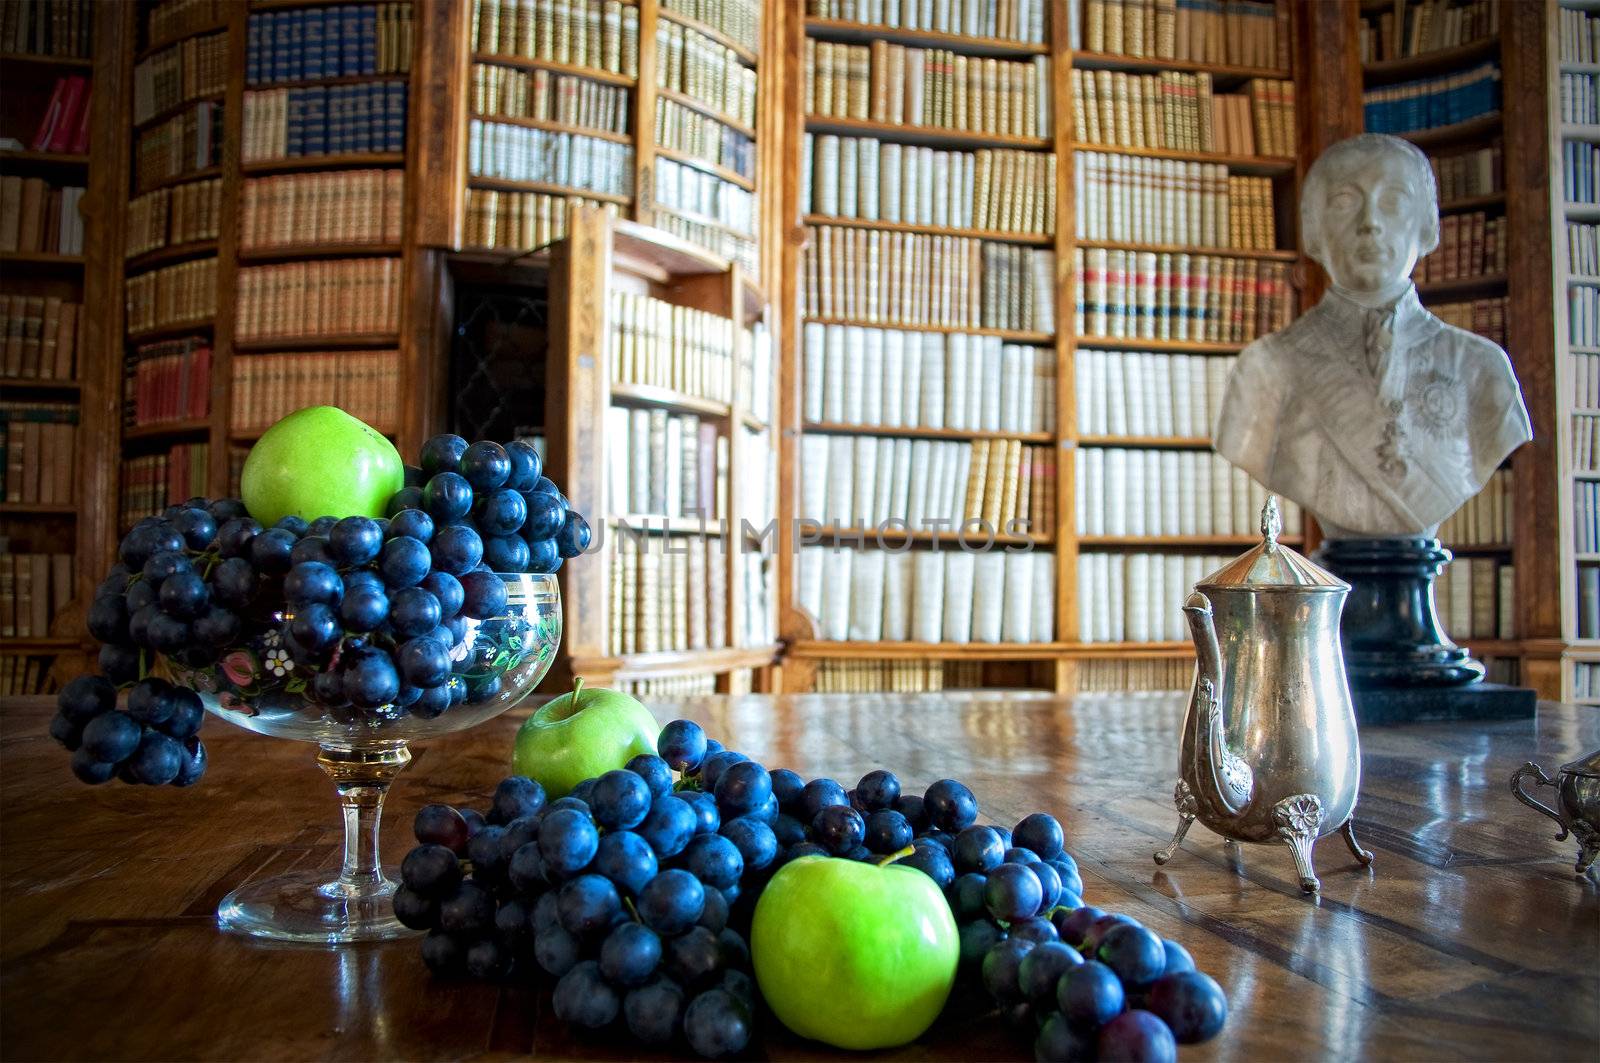 Still Life with grapes and apples in an old library